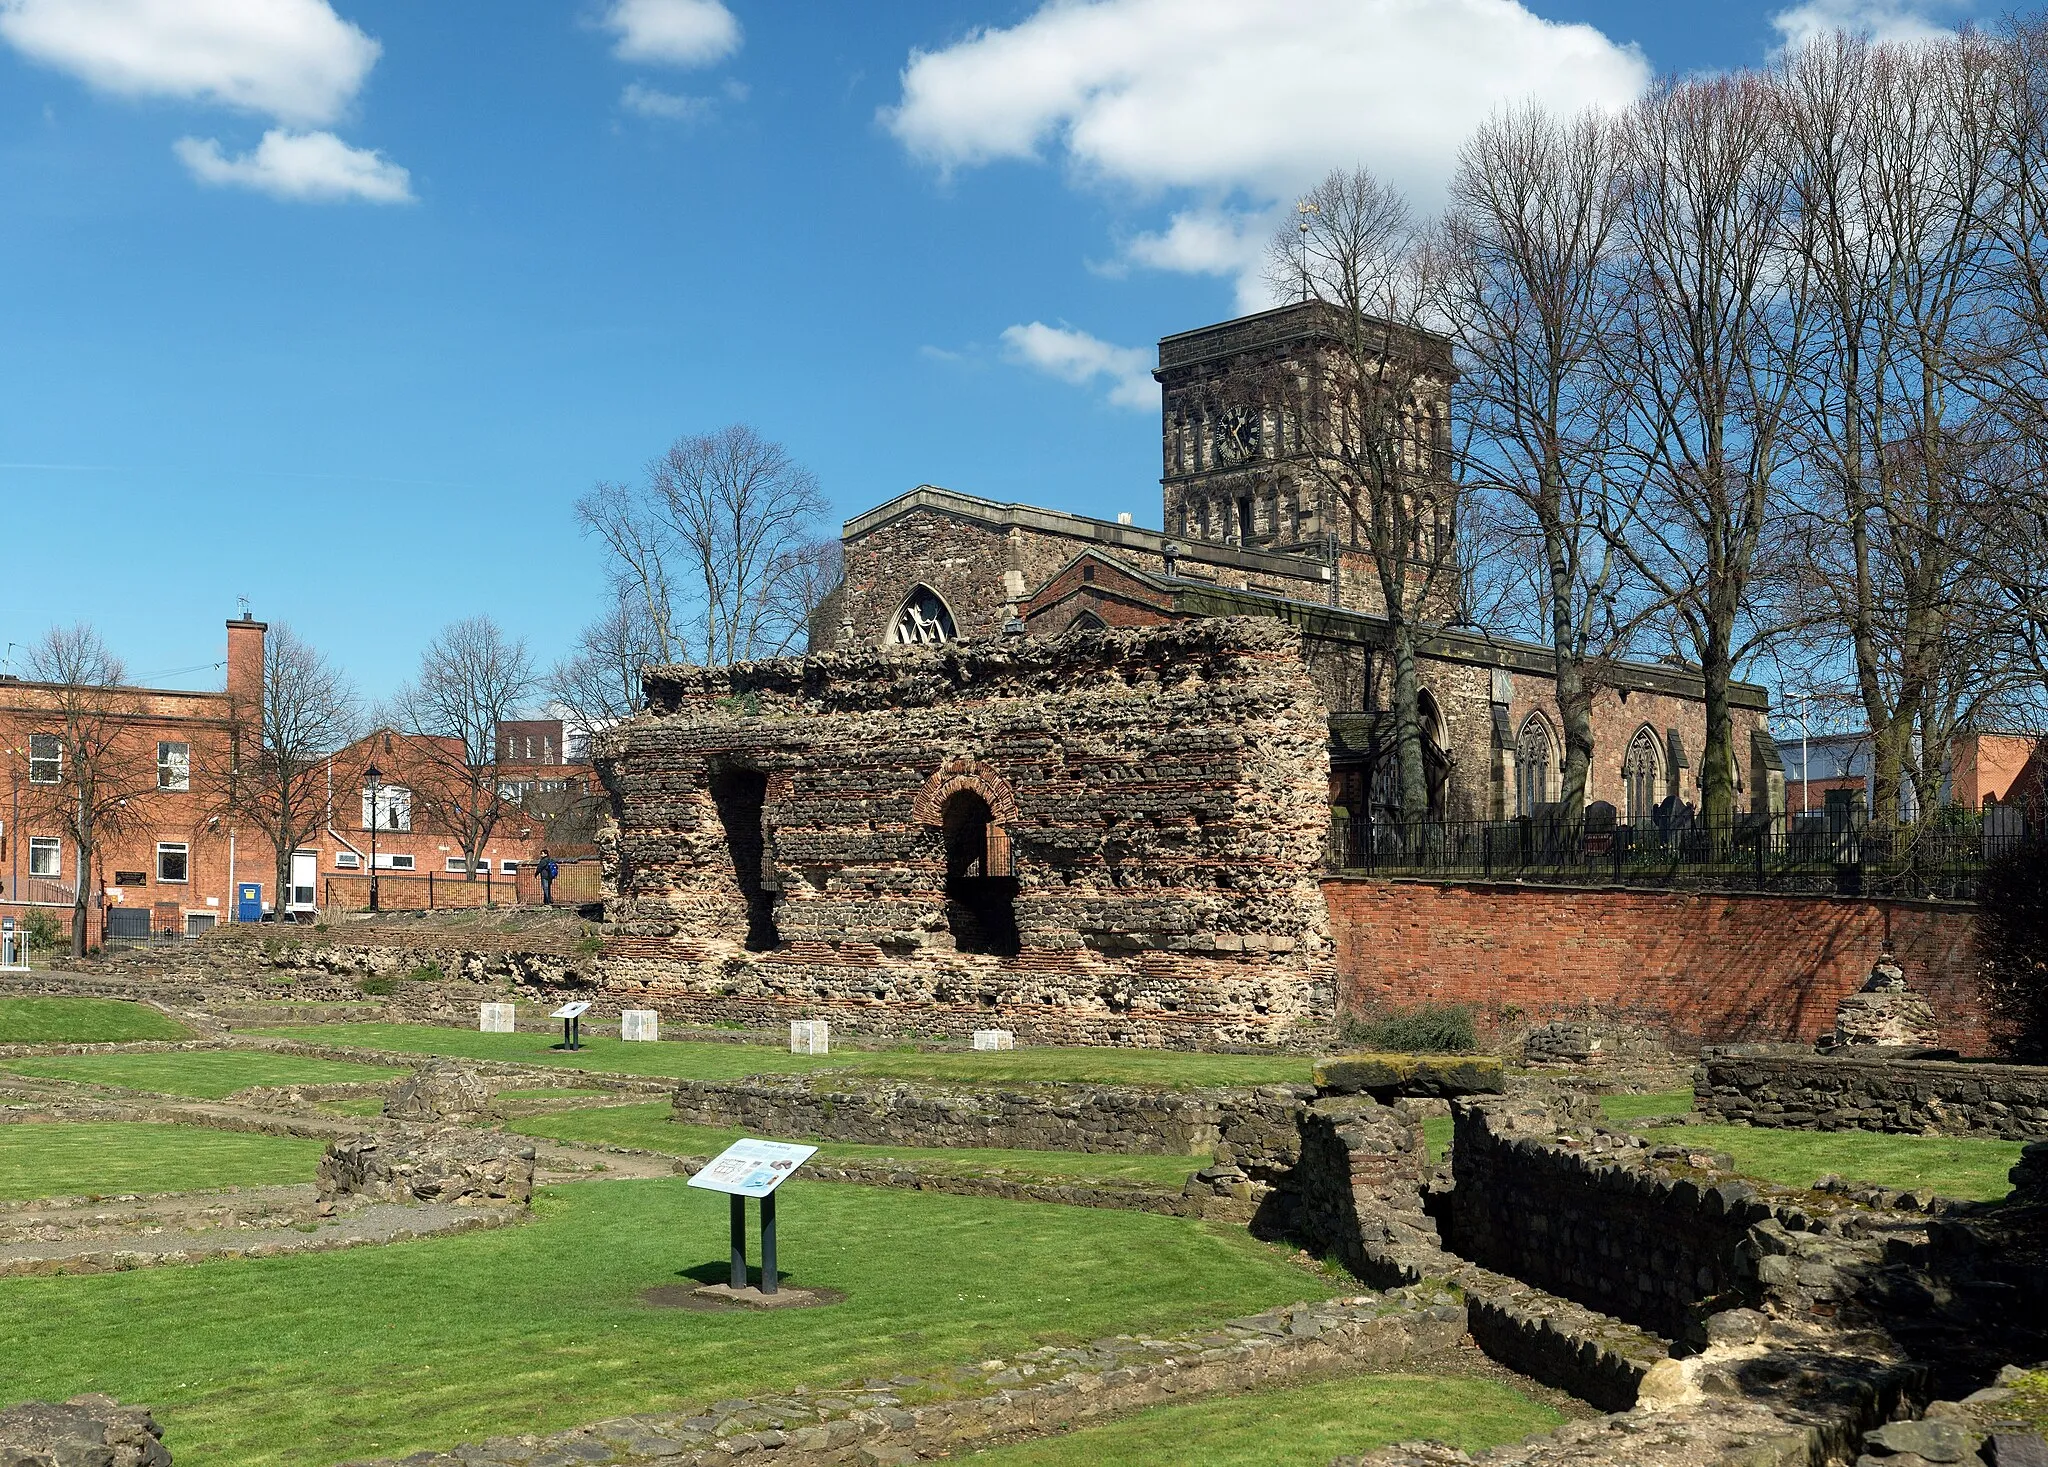 Photo showing: The Jewry Wall and St Nicholas' Church in Leicester, England. The wall is the second largest piece of surviving civil Roman building in Britain, and is both a Scheduled Monument and a Grade I listed building. Originally it separated the Palaestra from the Frigidarium at Ratae Corieltauvorum's baths. St Nicholas' Church is also Grade I listed, and dates from AD 880.